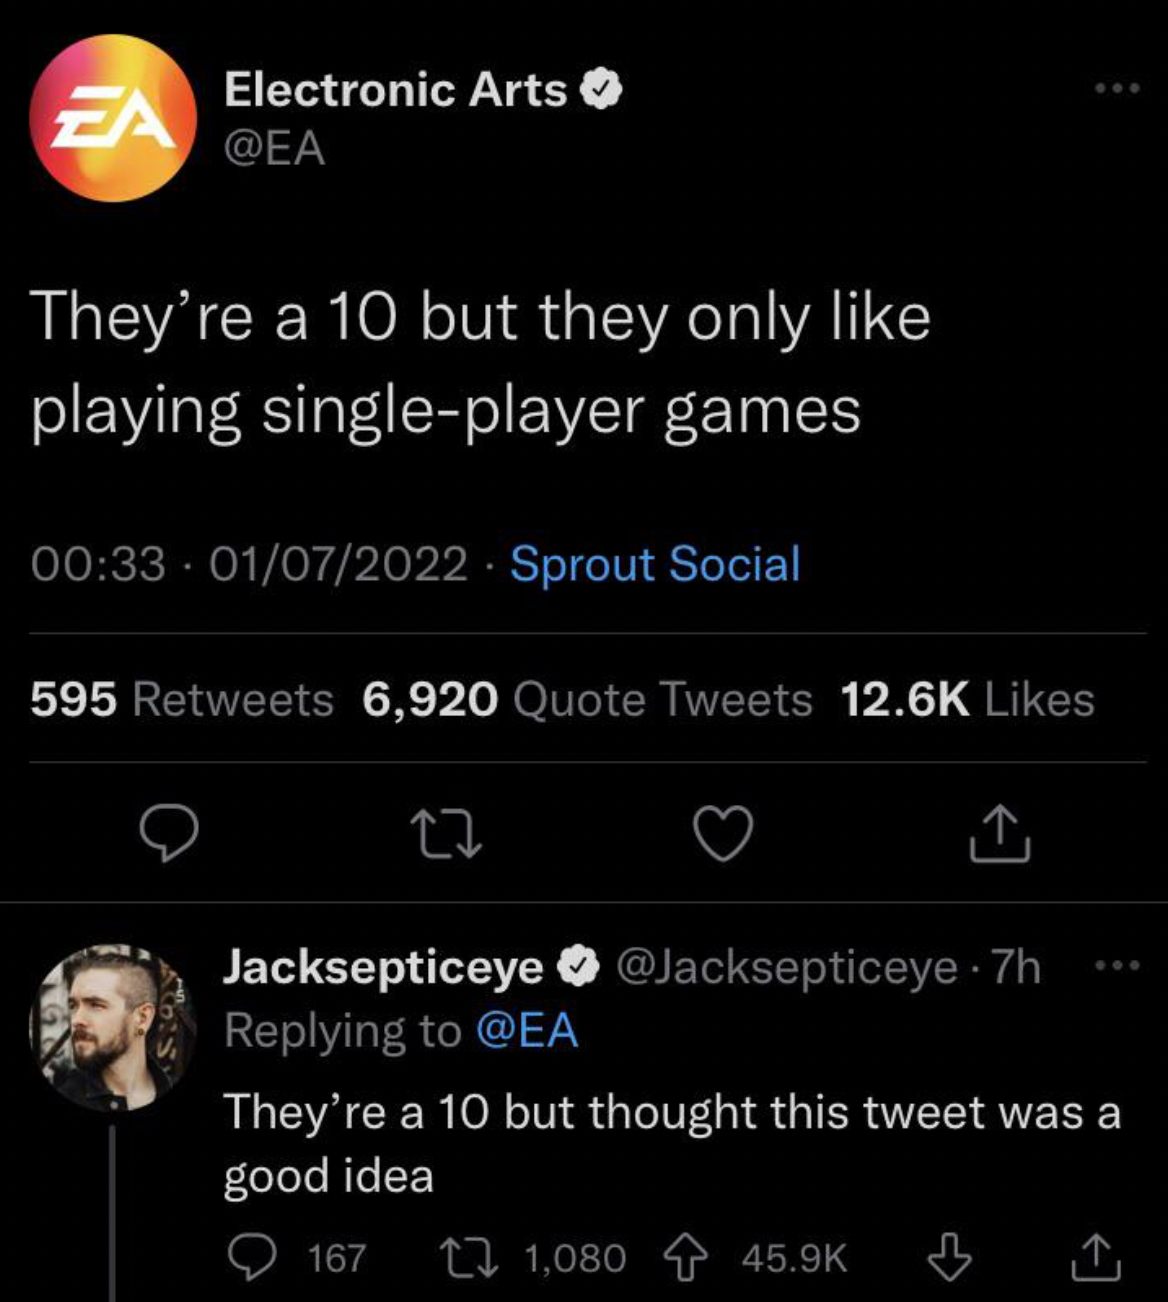 Foolish Facepalms - funny - Electronic Arts They're a 10 but they only playing singleplayer games